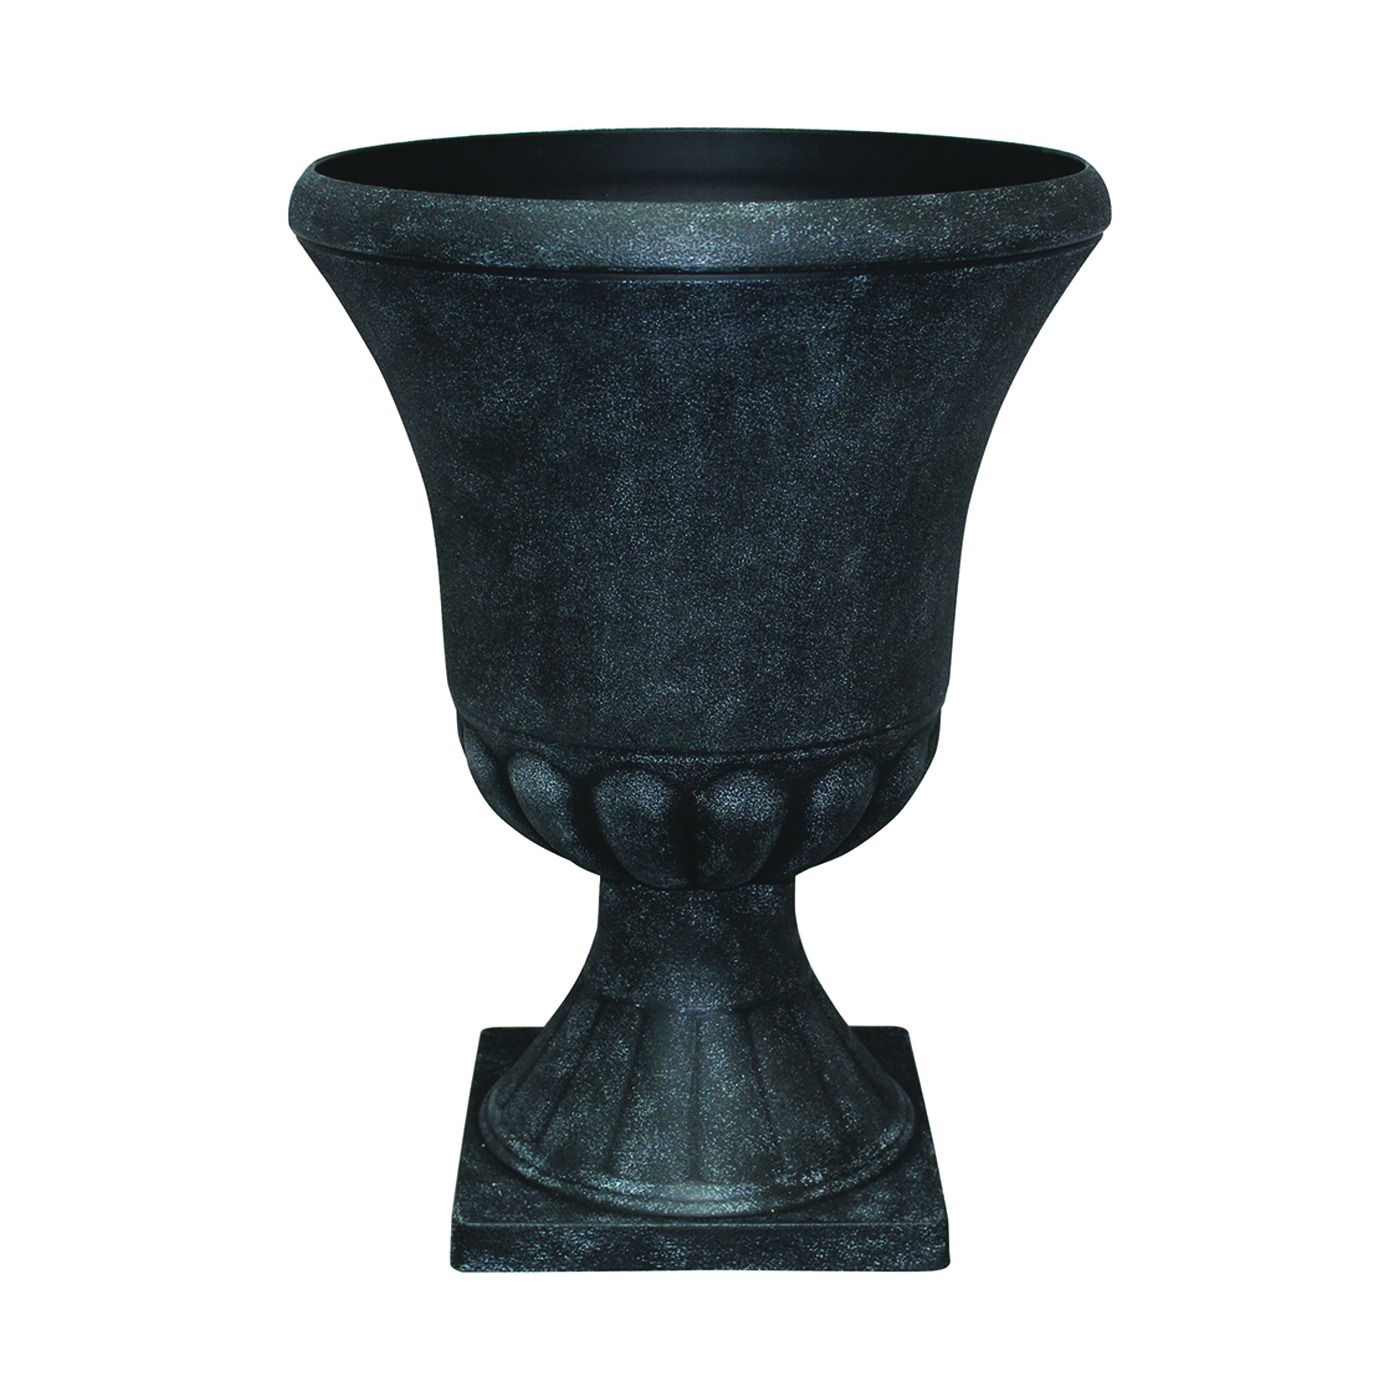 EB-029816 Winston Urn, 16 in W, 16 in D, Resin/Stone Composite, Weathered Black